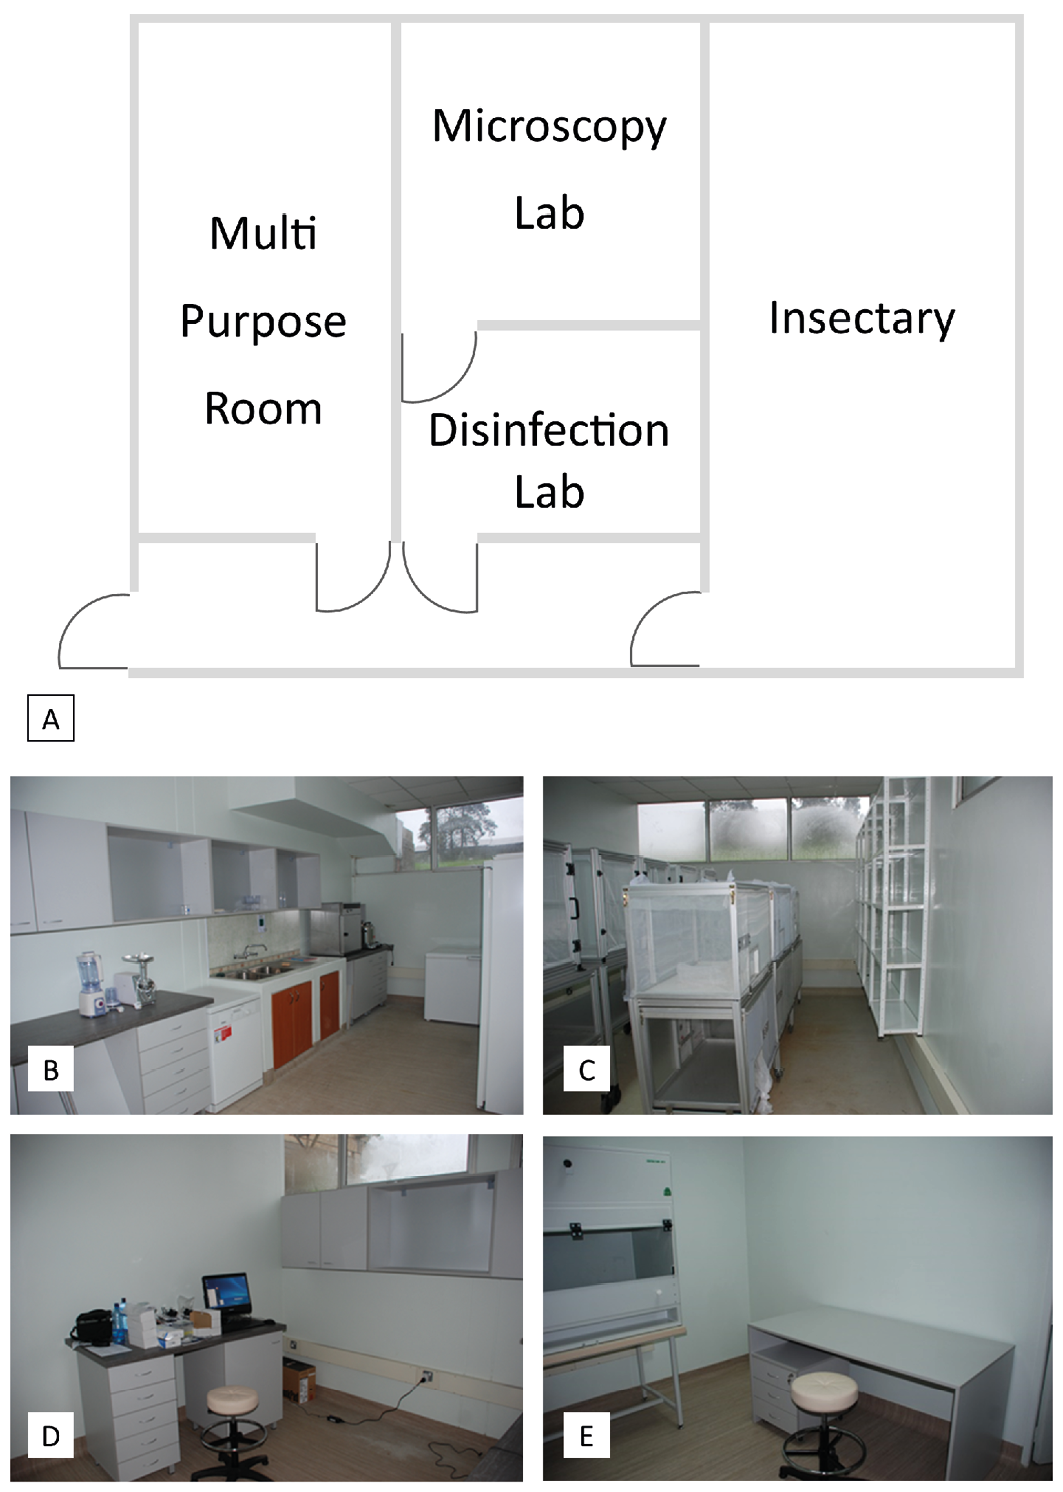 One plan drawing and four facility photographs describe the layout and equipment for the medicinal maggot production and biotherapy research laboratory established at KARI in Kenya.